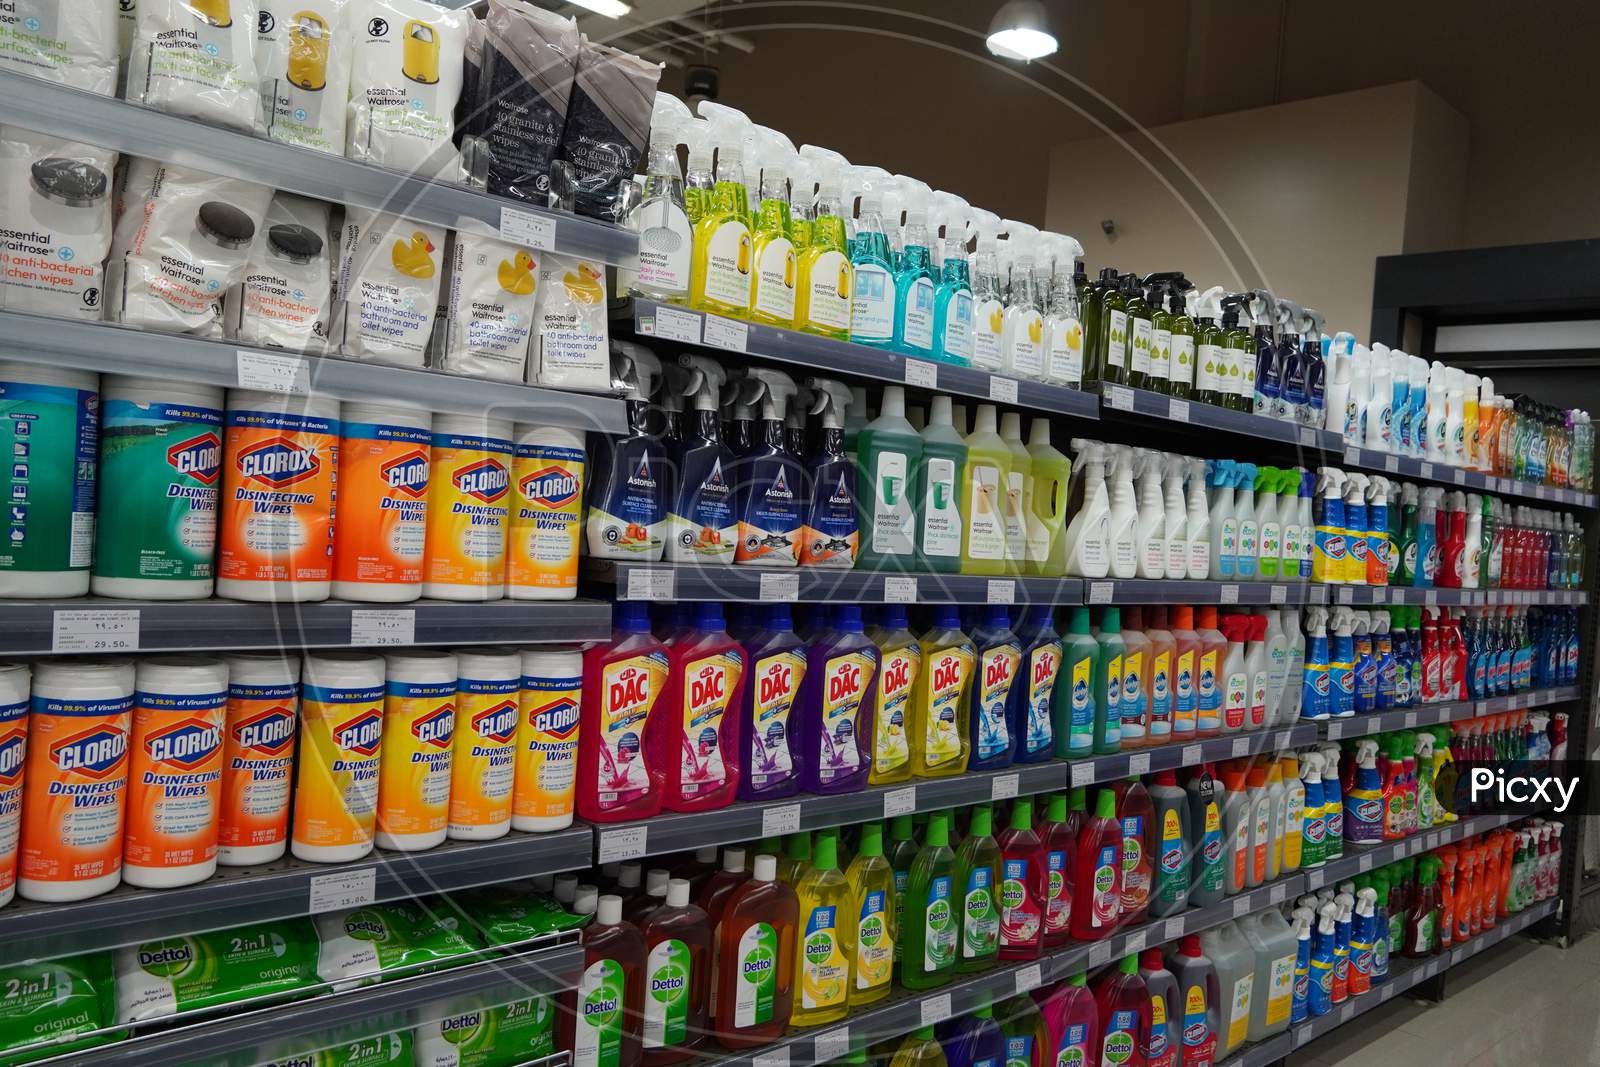 Cleaning Supplies, Sprays, Liquids Cleaning Detergents For Sale On Supermarket Stand. Bottles With Cleaning Products For Cleaning House Of Various Manufacturers On Shelves. - Dubai Uae December 2019